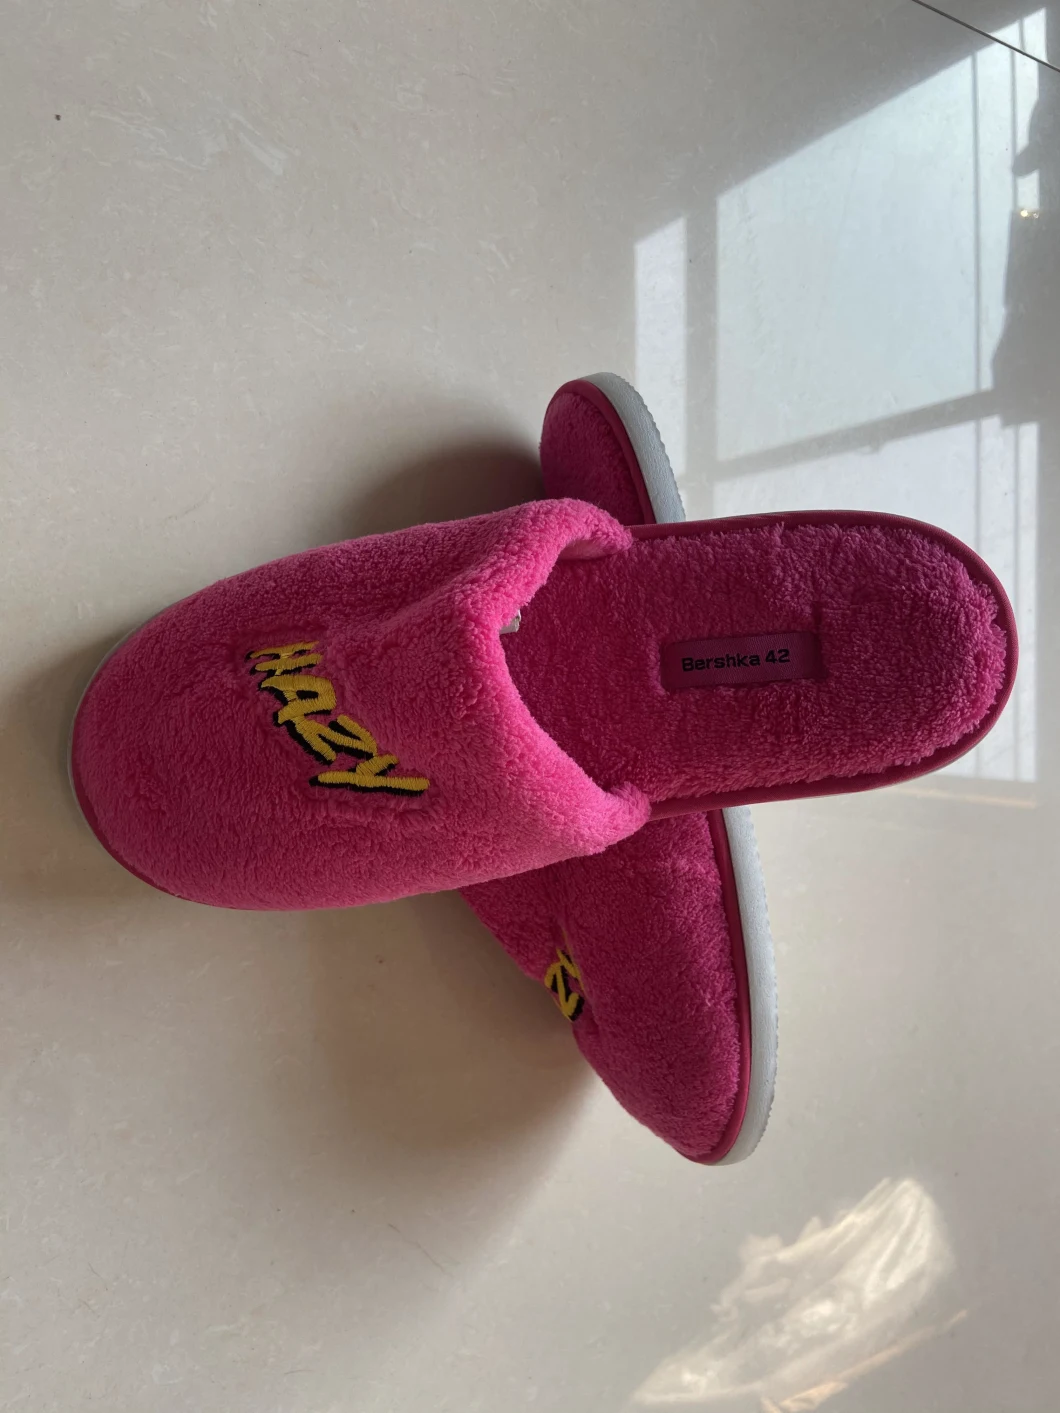 White Hotel Slippers Closed Toe with 5 Star Quality